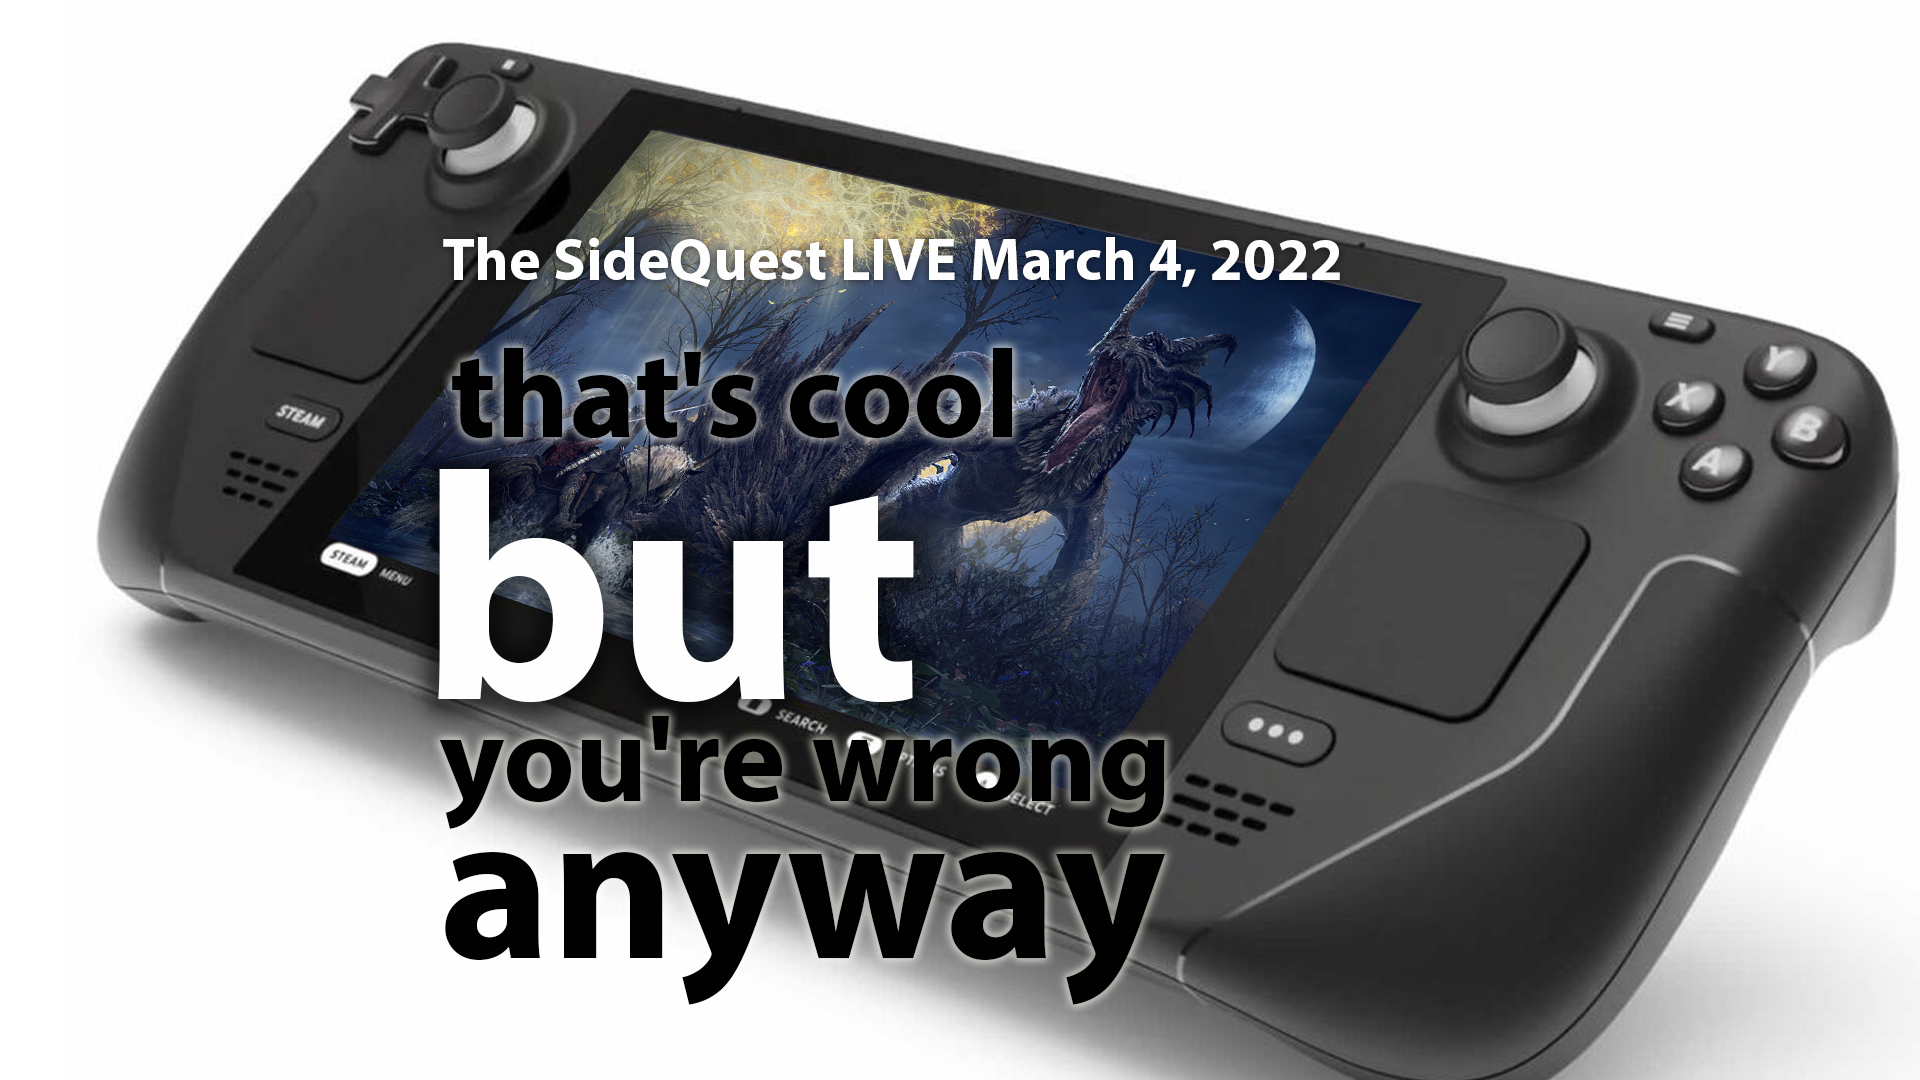 The SideQuest LIVE March 4, 2022: That’s cool, but you’re wrong anyway